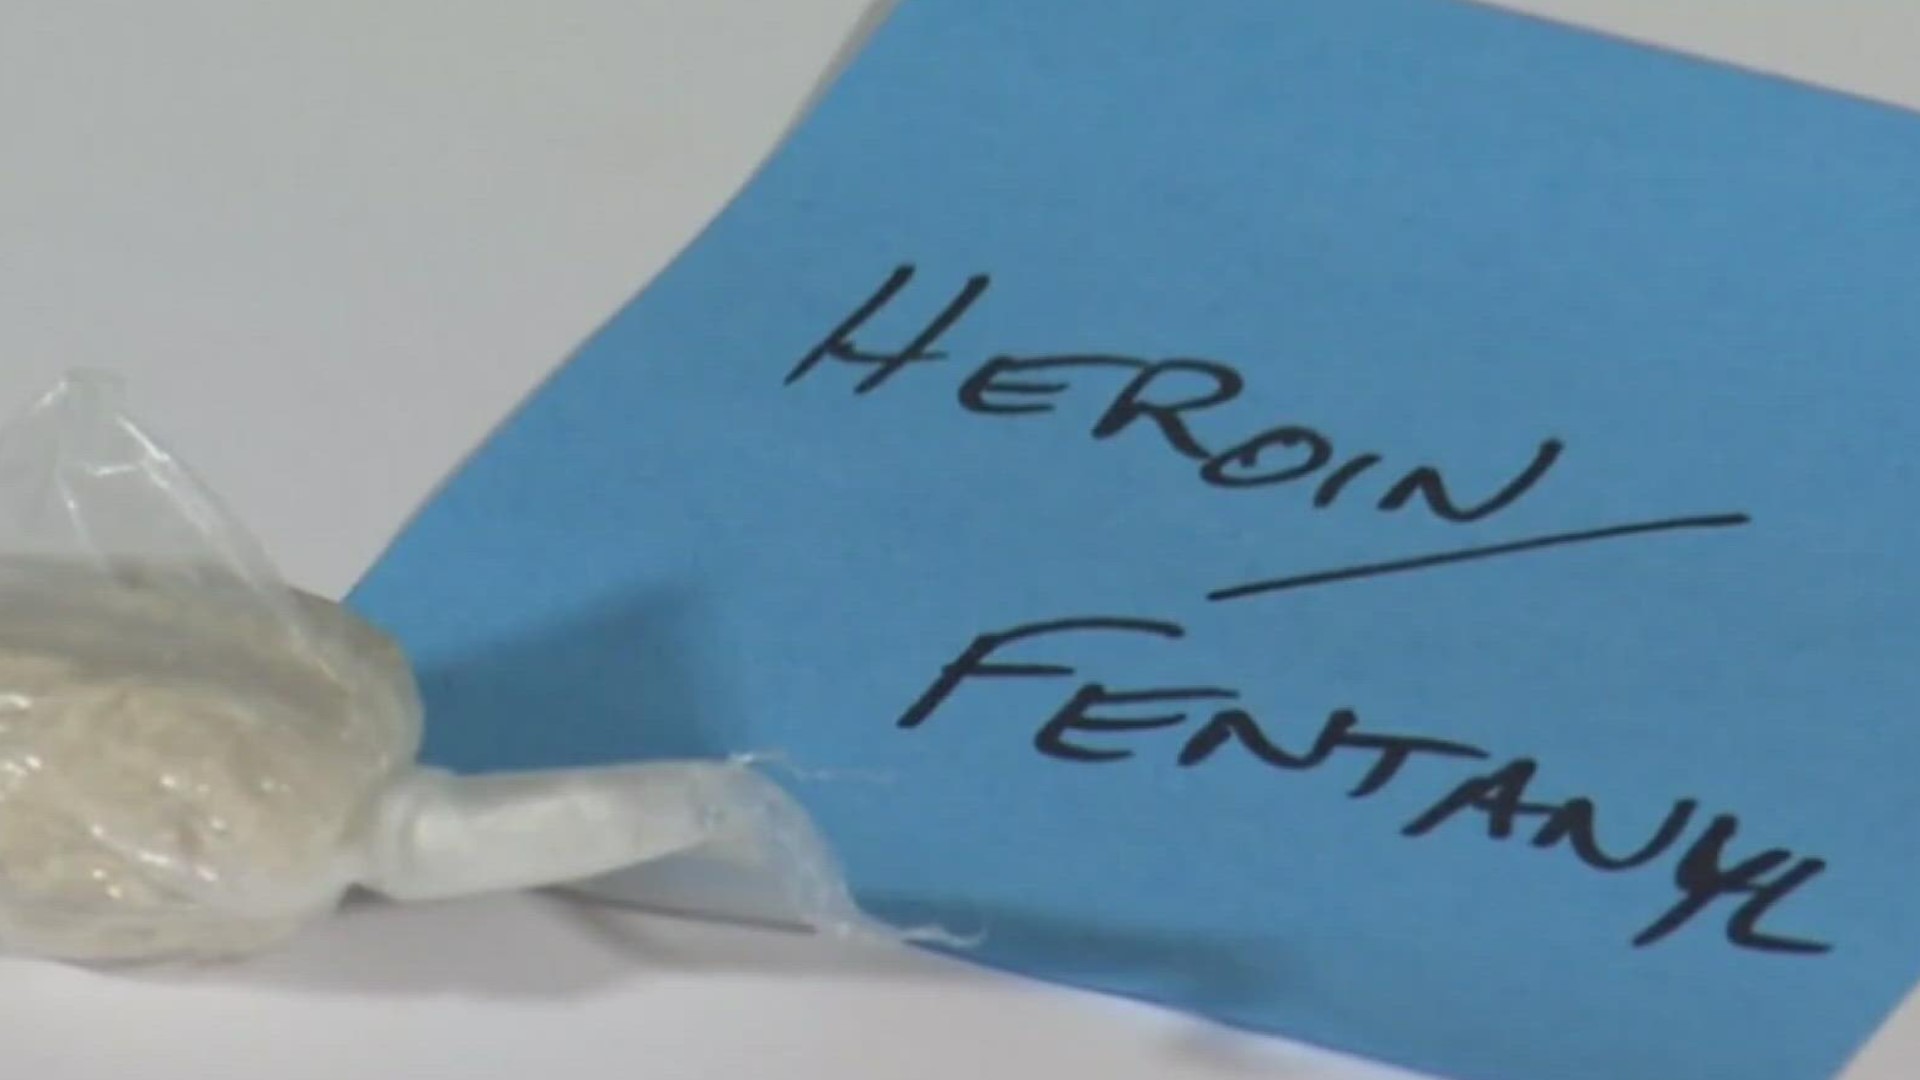 Border security and the growing problem of deadly and addictive drugs like fentanyl are high item concerns for Texas politicians.